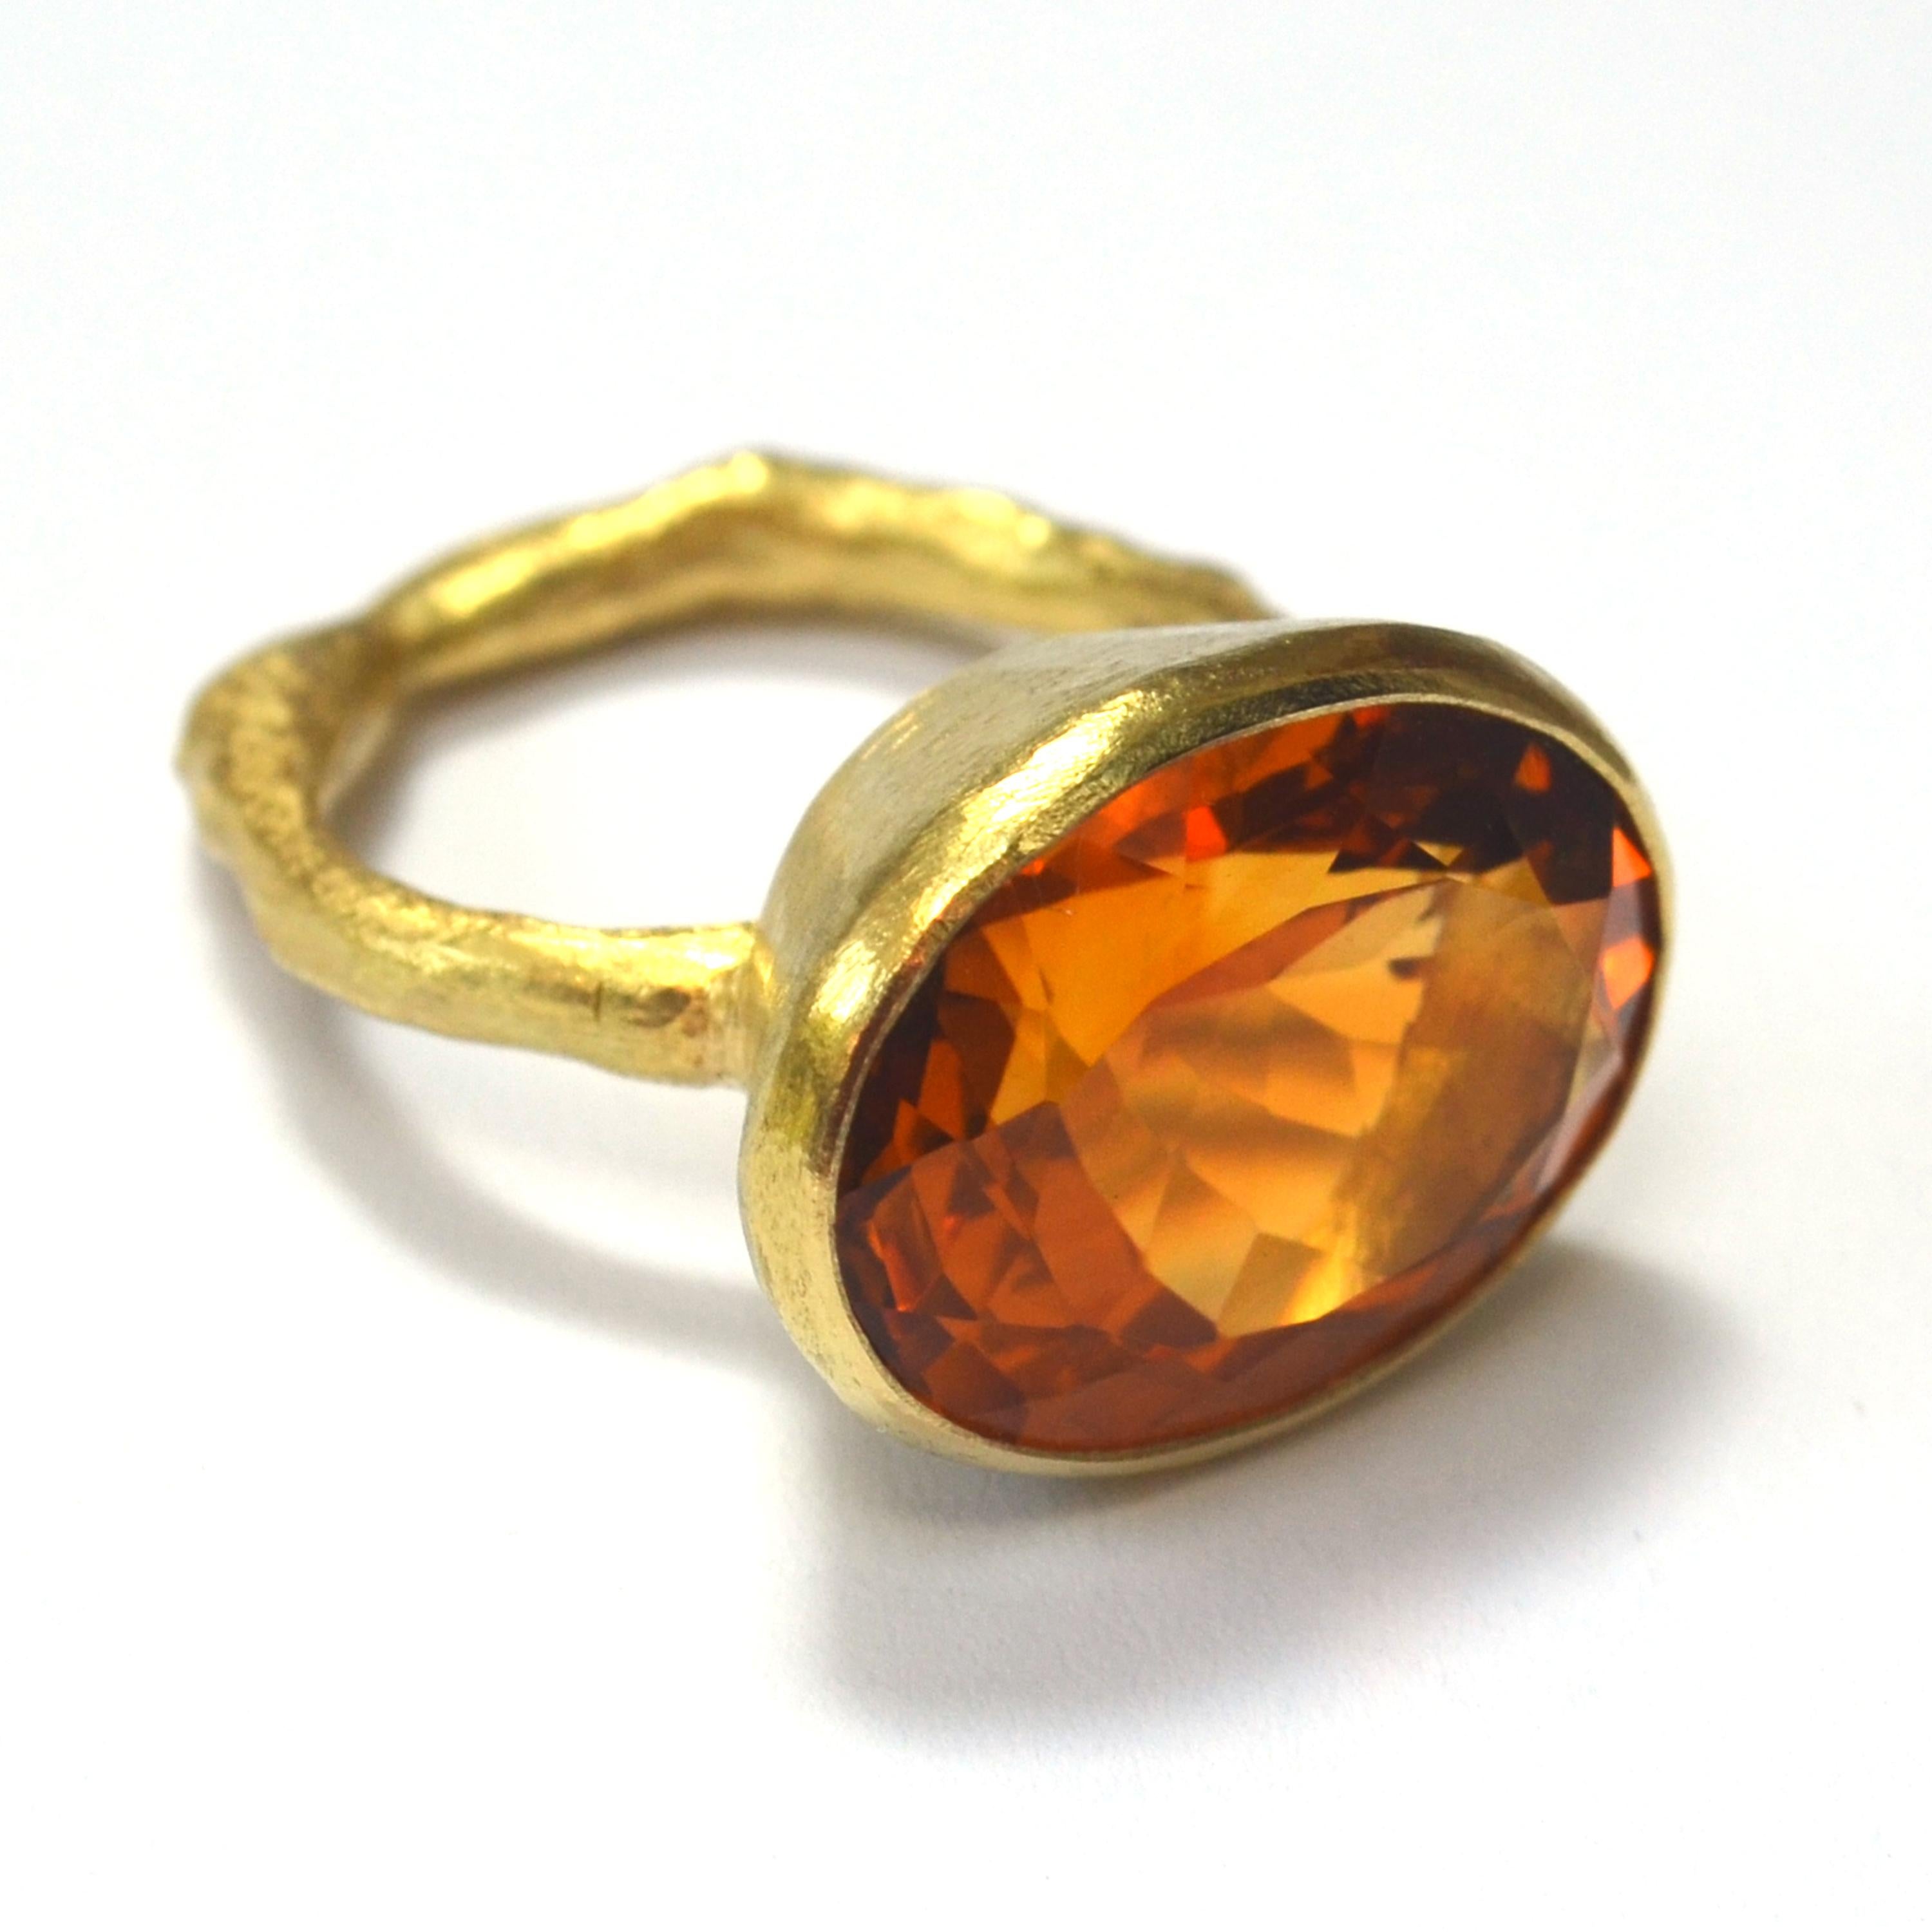 Large oval 19 carat Madeira Citrine, 16mm x 21mm in 18k yellow gold setting, 9mm depth, on organic textured 18k yellow gold band. A stunning Cocktail ring, the tones in this Citrine are warm, sherry-like browns and oranges. Disa uses reticulation